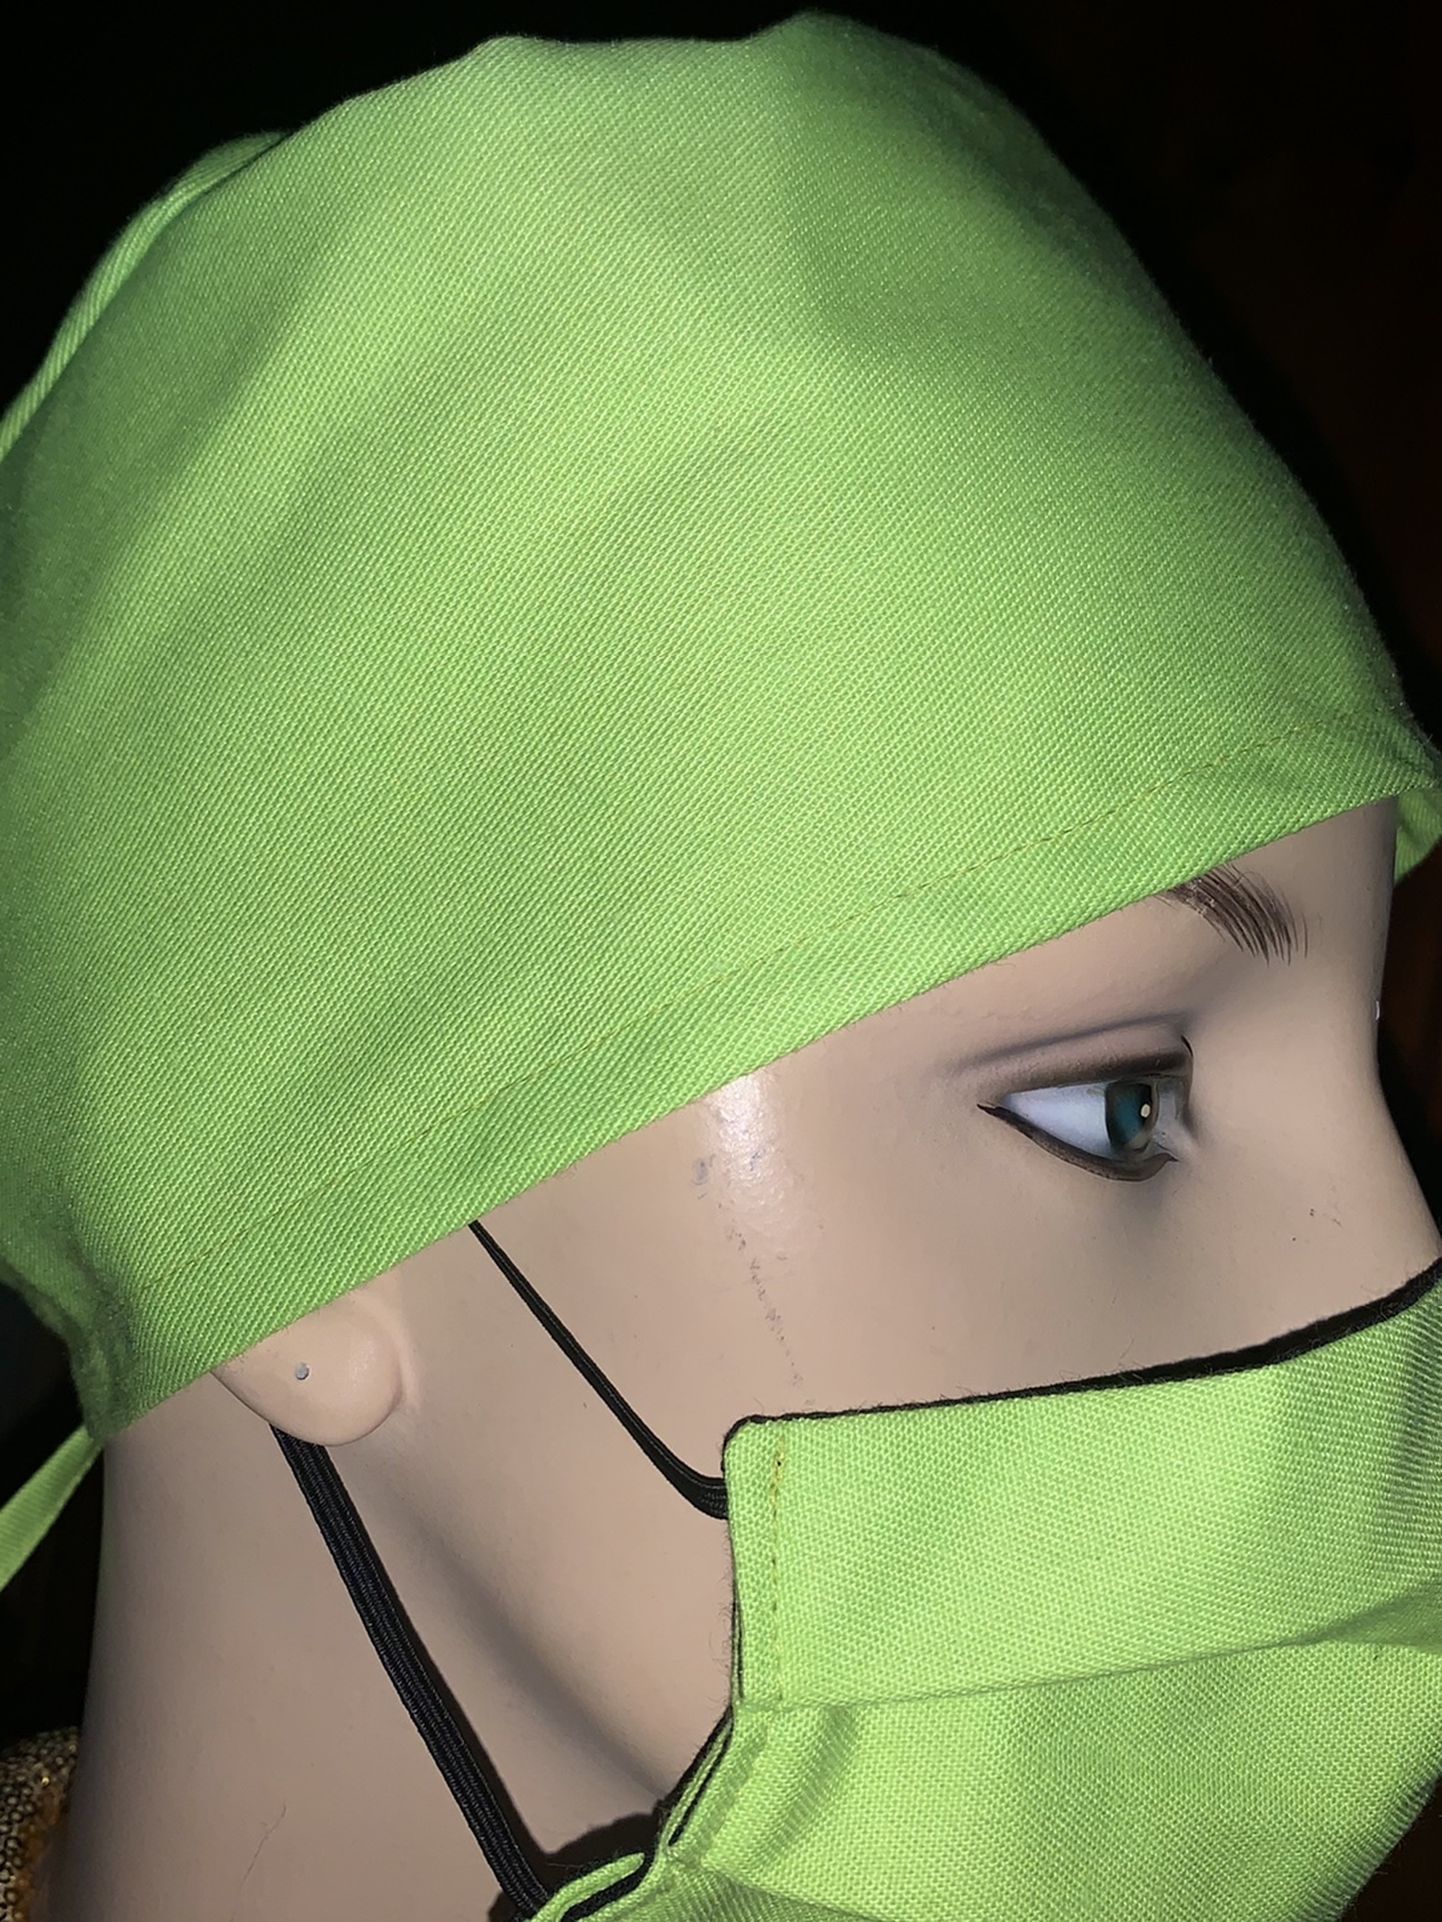 Neon Green Scrub Cap And Face Mask With Filter